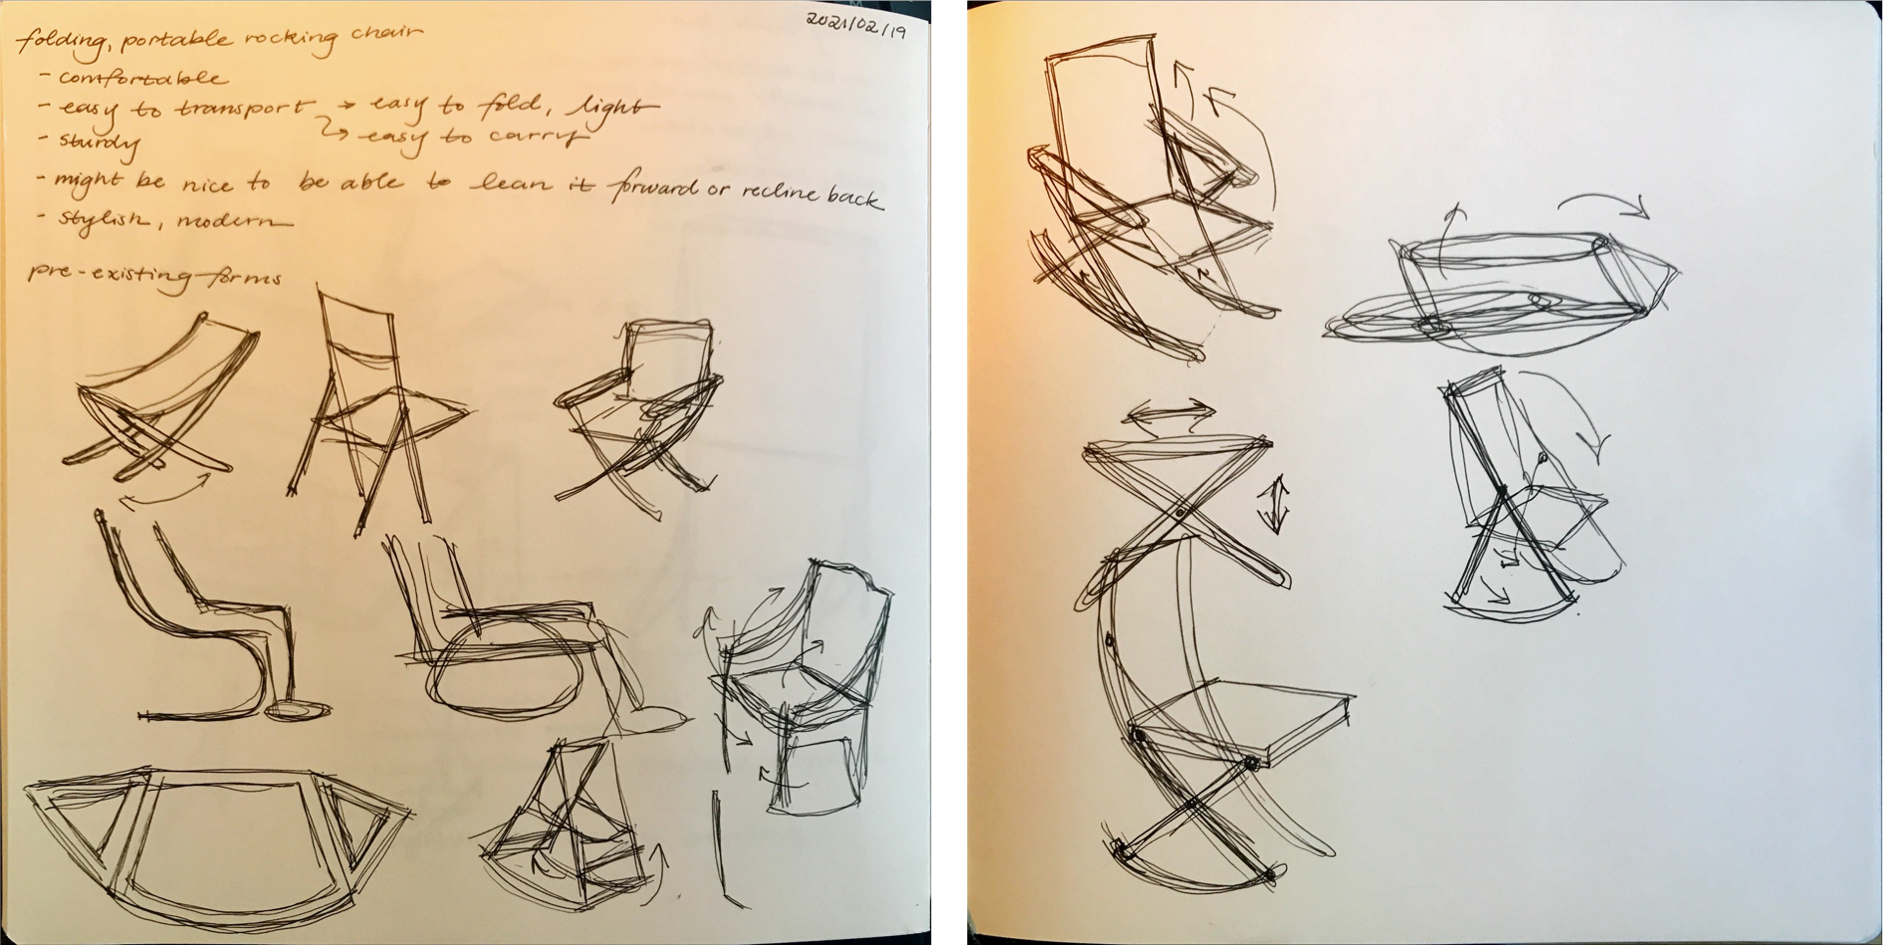 Rocking chair ideation sketches.